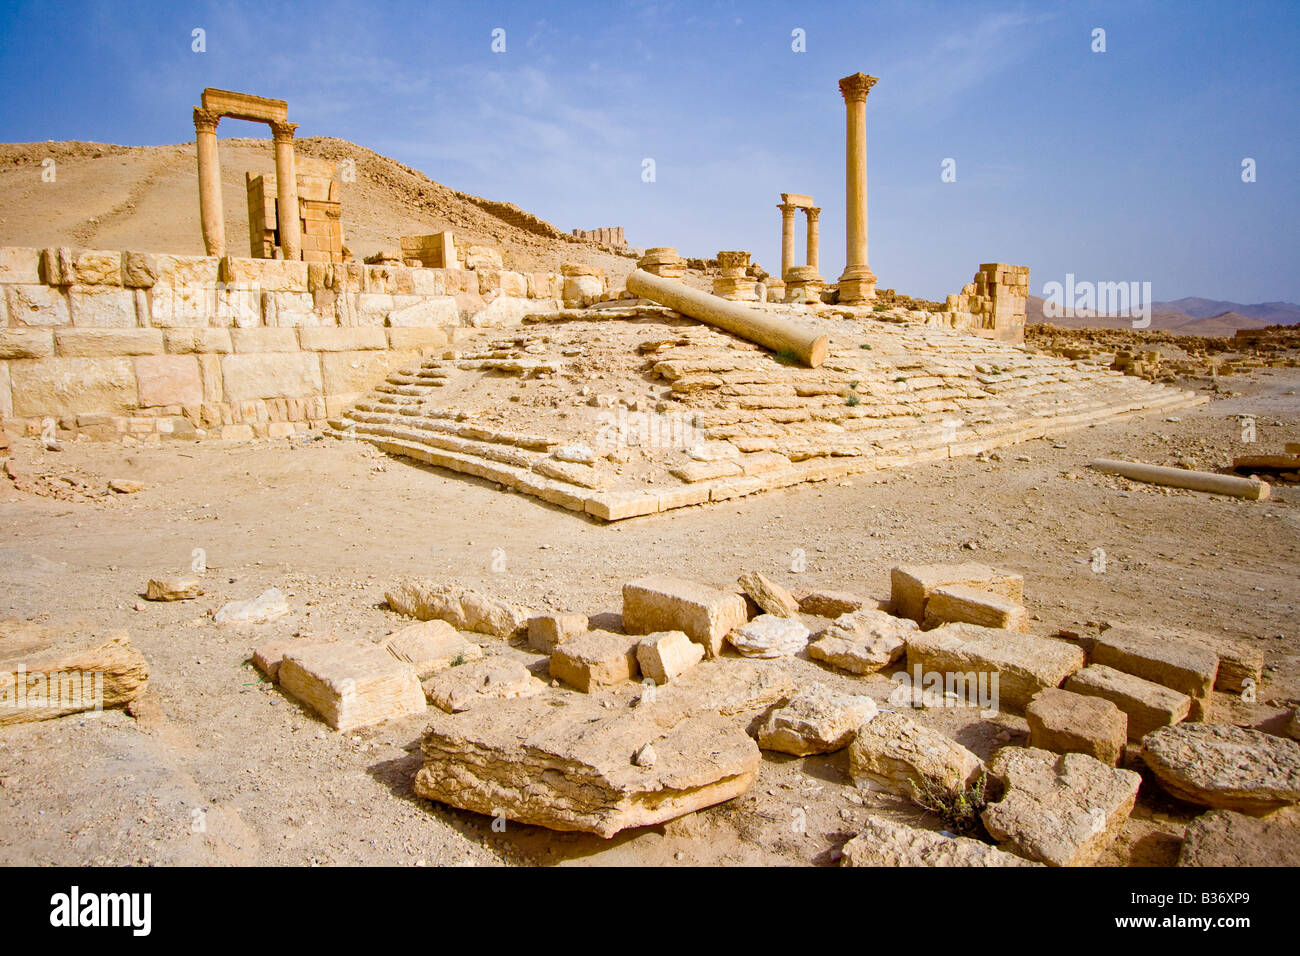 Camp of Diocletian Roman Ruins of Palmyra in Syria Stock Photo